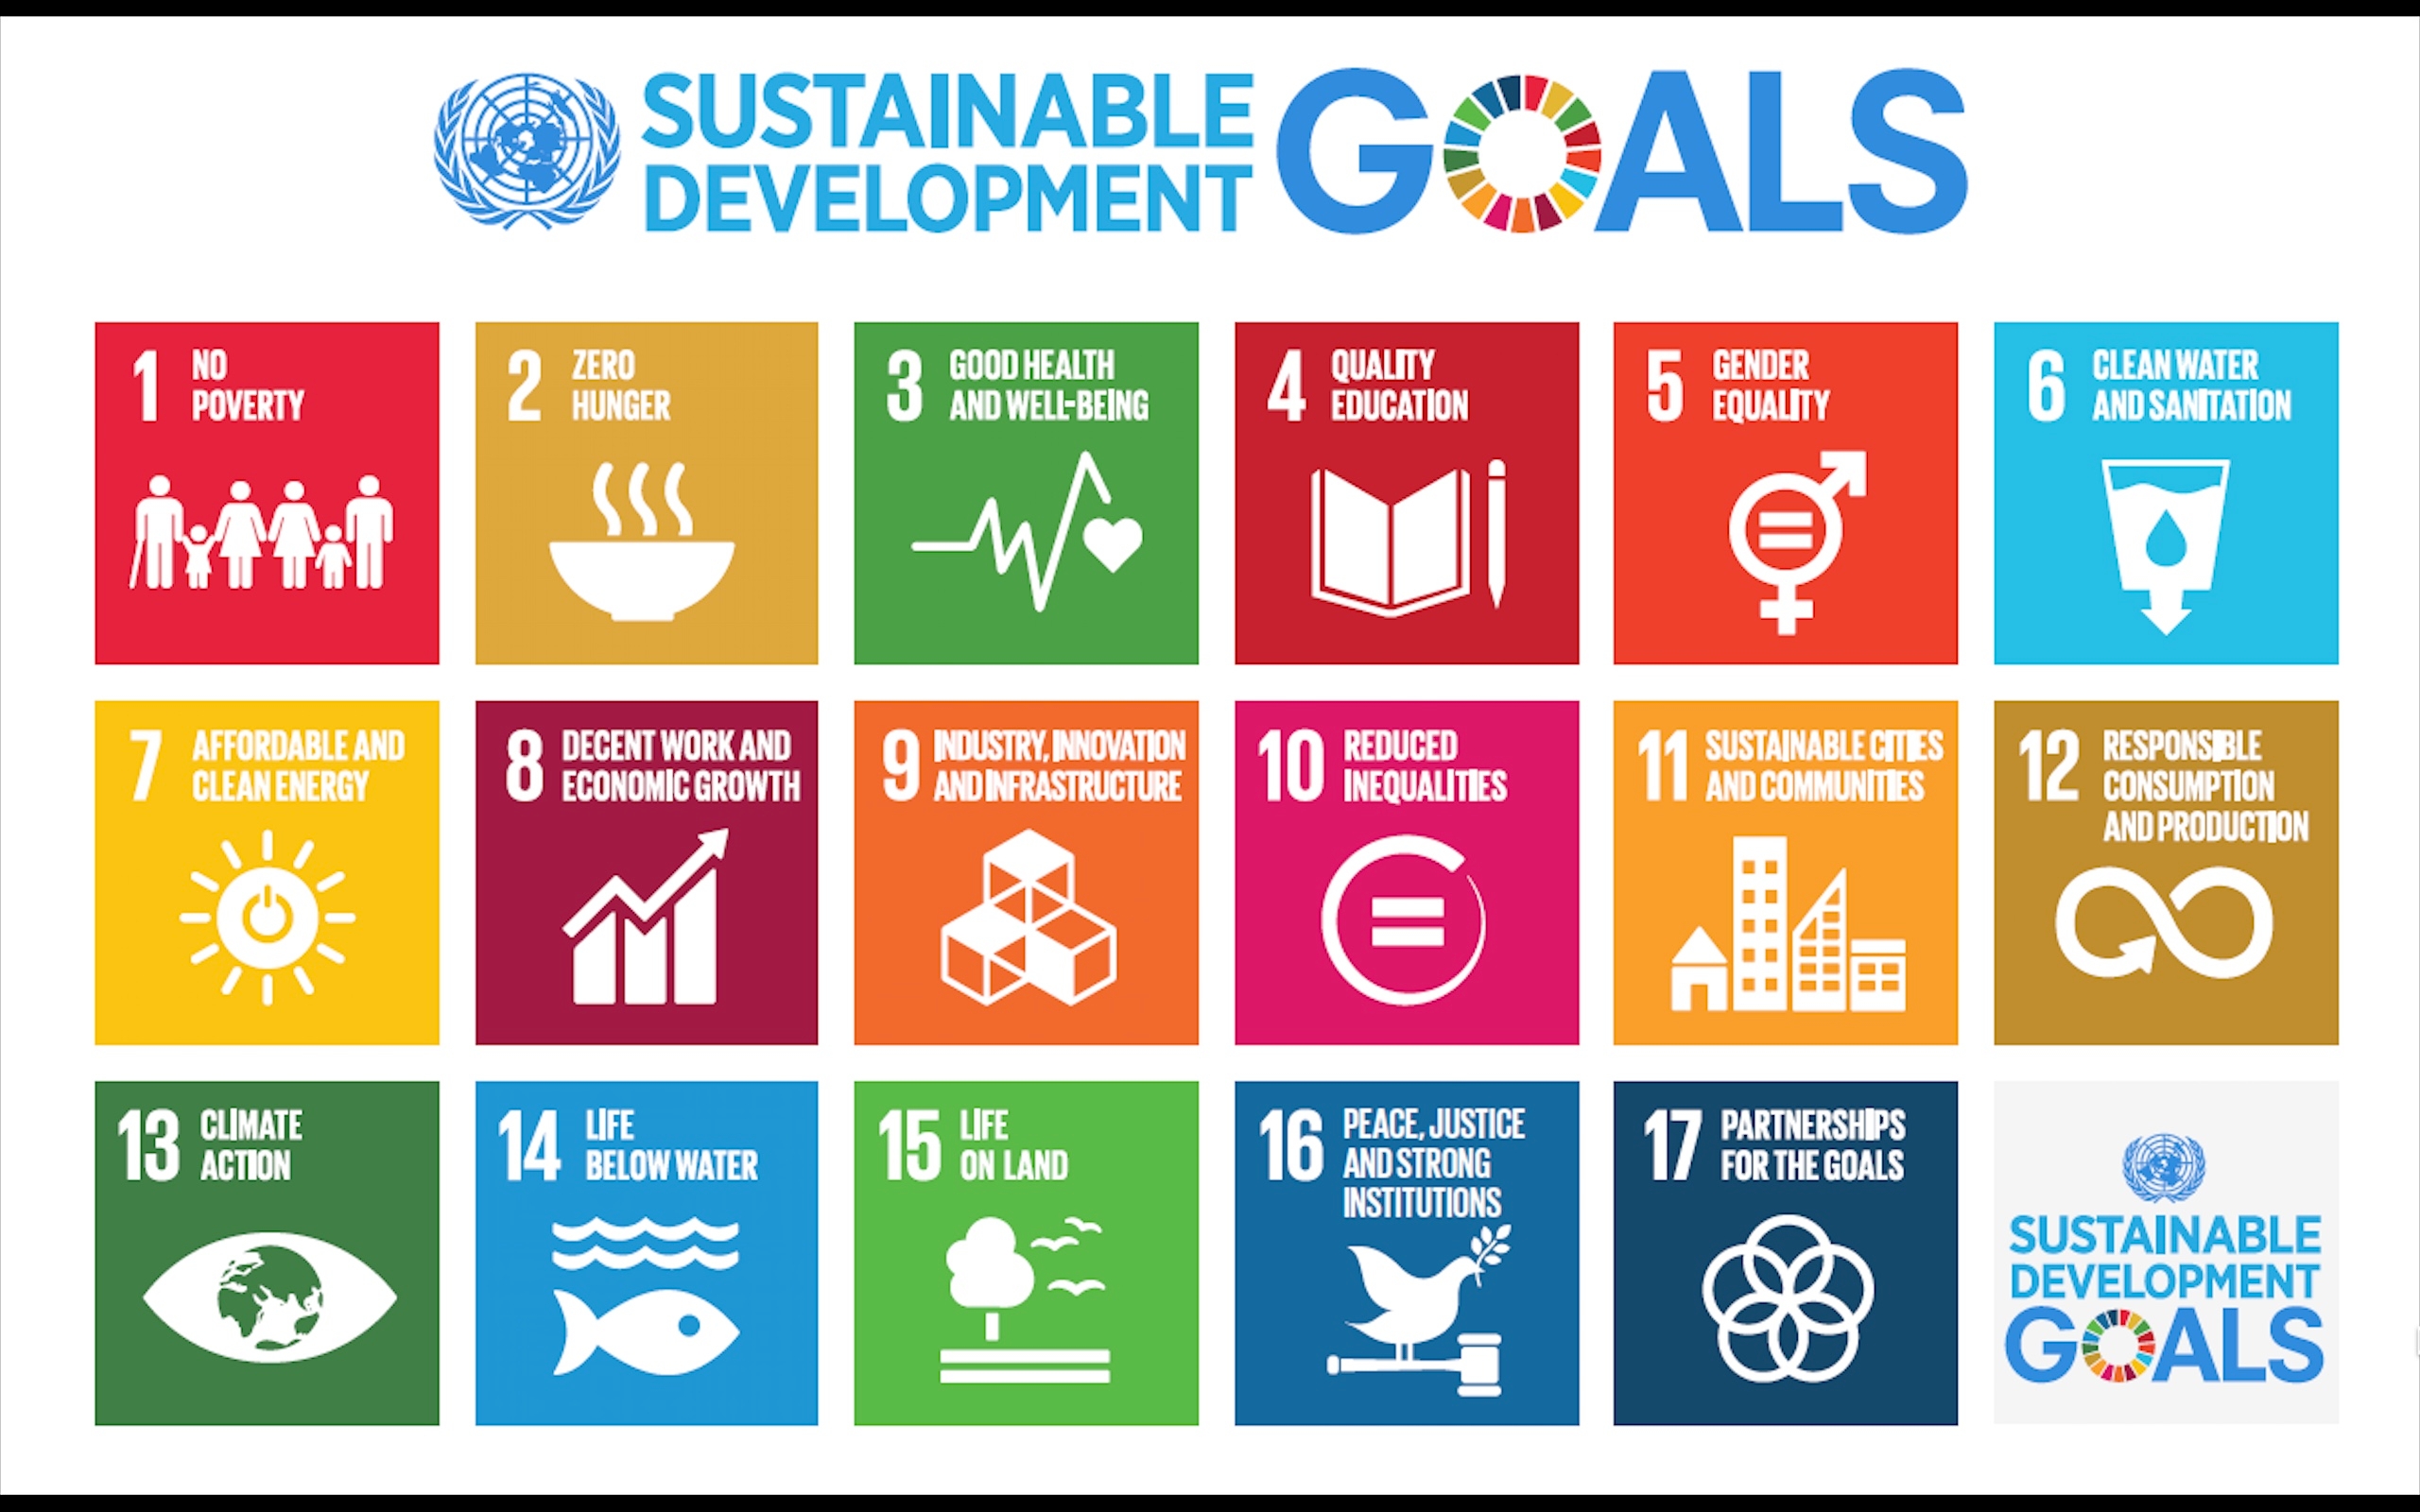 17 coloured squares with symbols show the 17 sustainable development goals. 